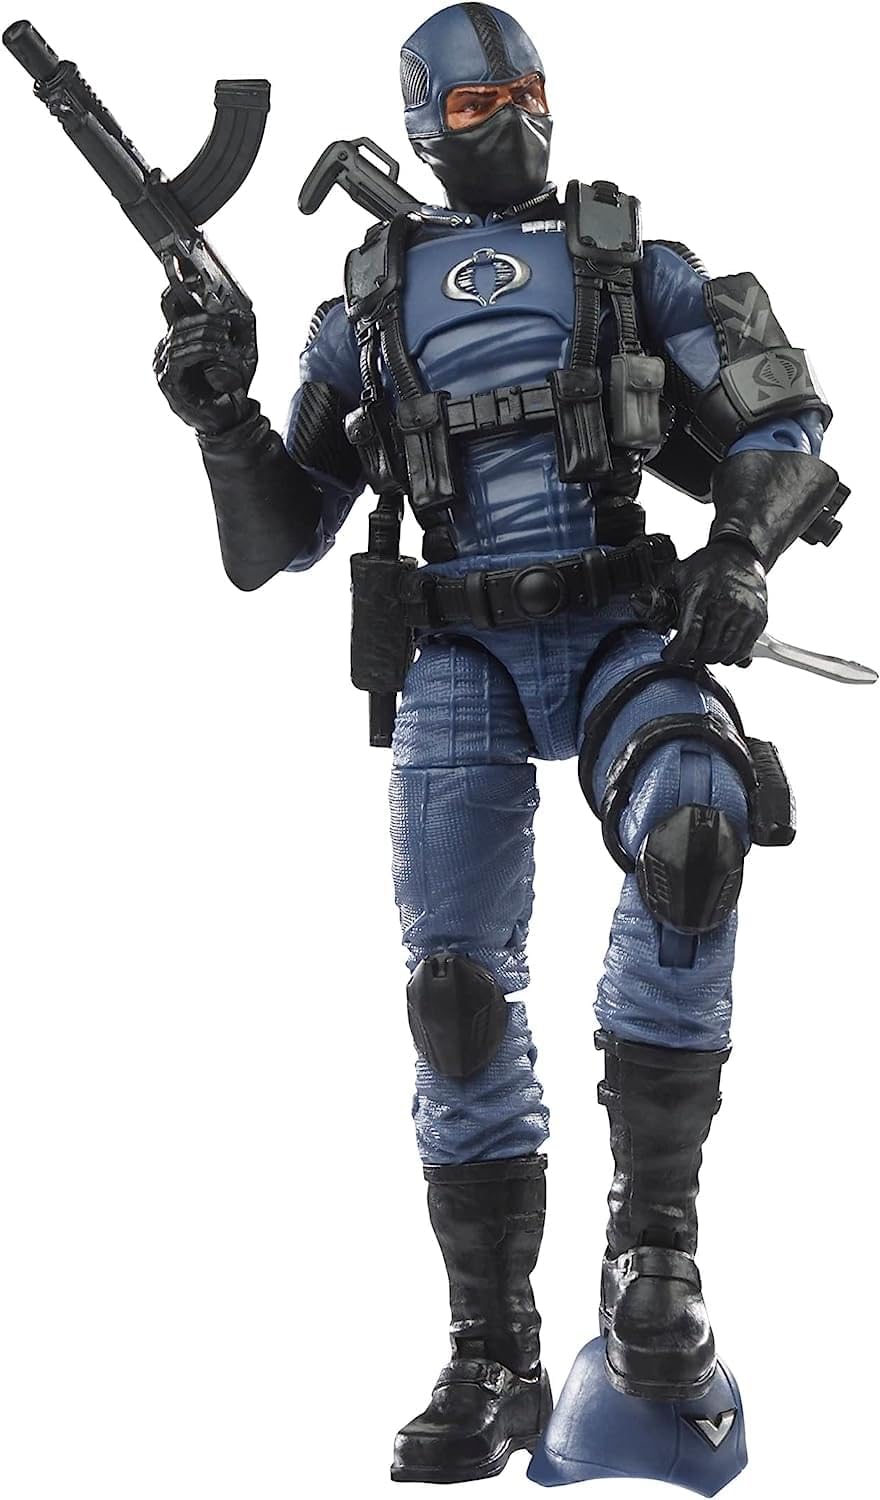 G.I. Joe Classified Series Cobra Officer Action Figure 37 Collectible Premium Toy with Multiple Accessories 6-Inch-Scale, Custom Package Art